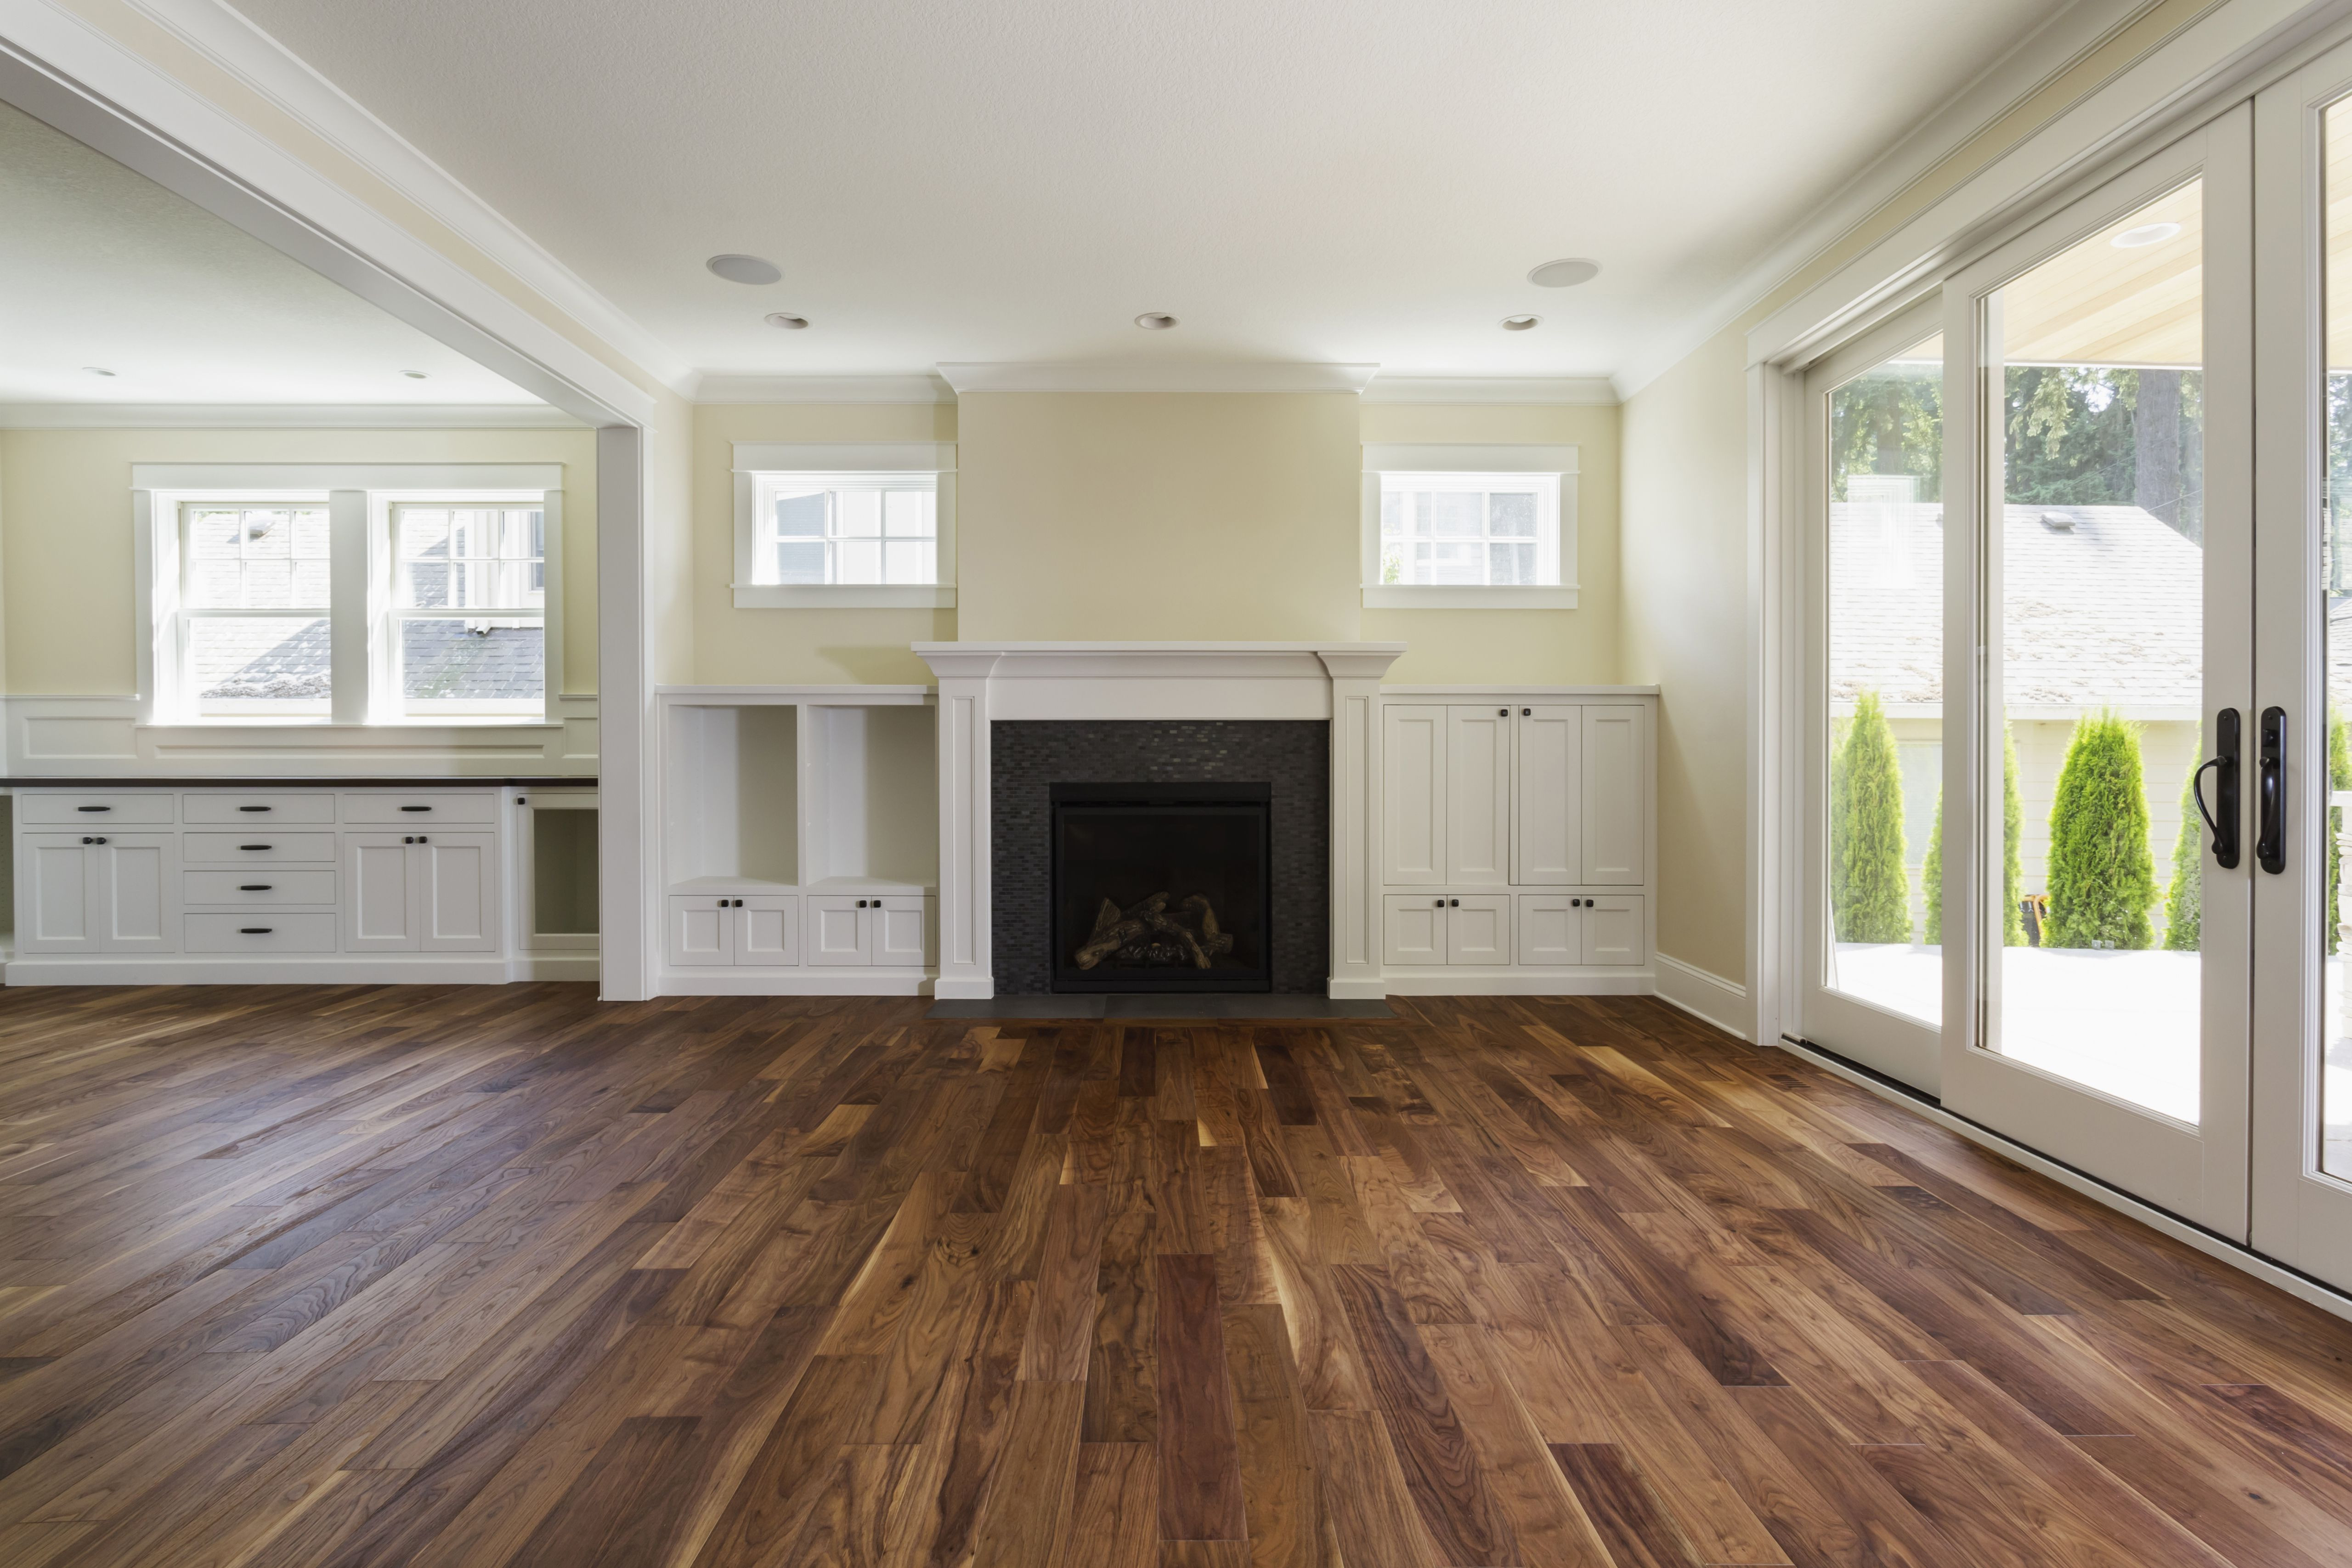 14 Recommended Cleaning Waxed Hardwood Floors 2024 free download cleaning waxed hardwood floors of the pros and cons of prefinished hardwood flooring throughout fireplace and built in shelves in living room 482143011 57bef8e33df78cc16e035397